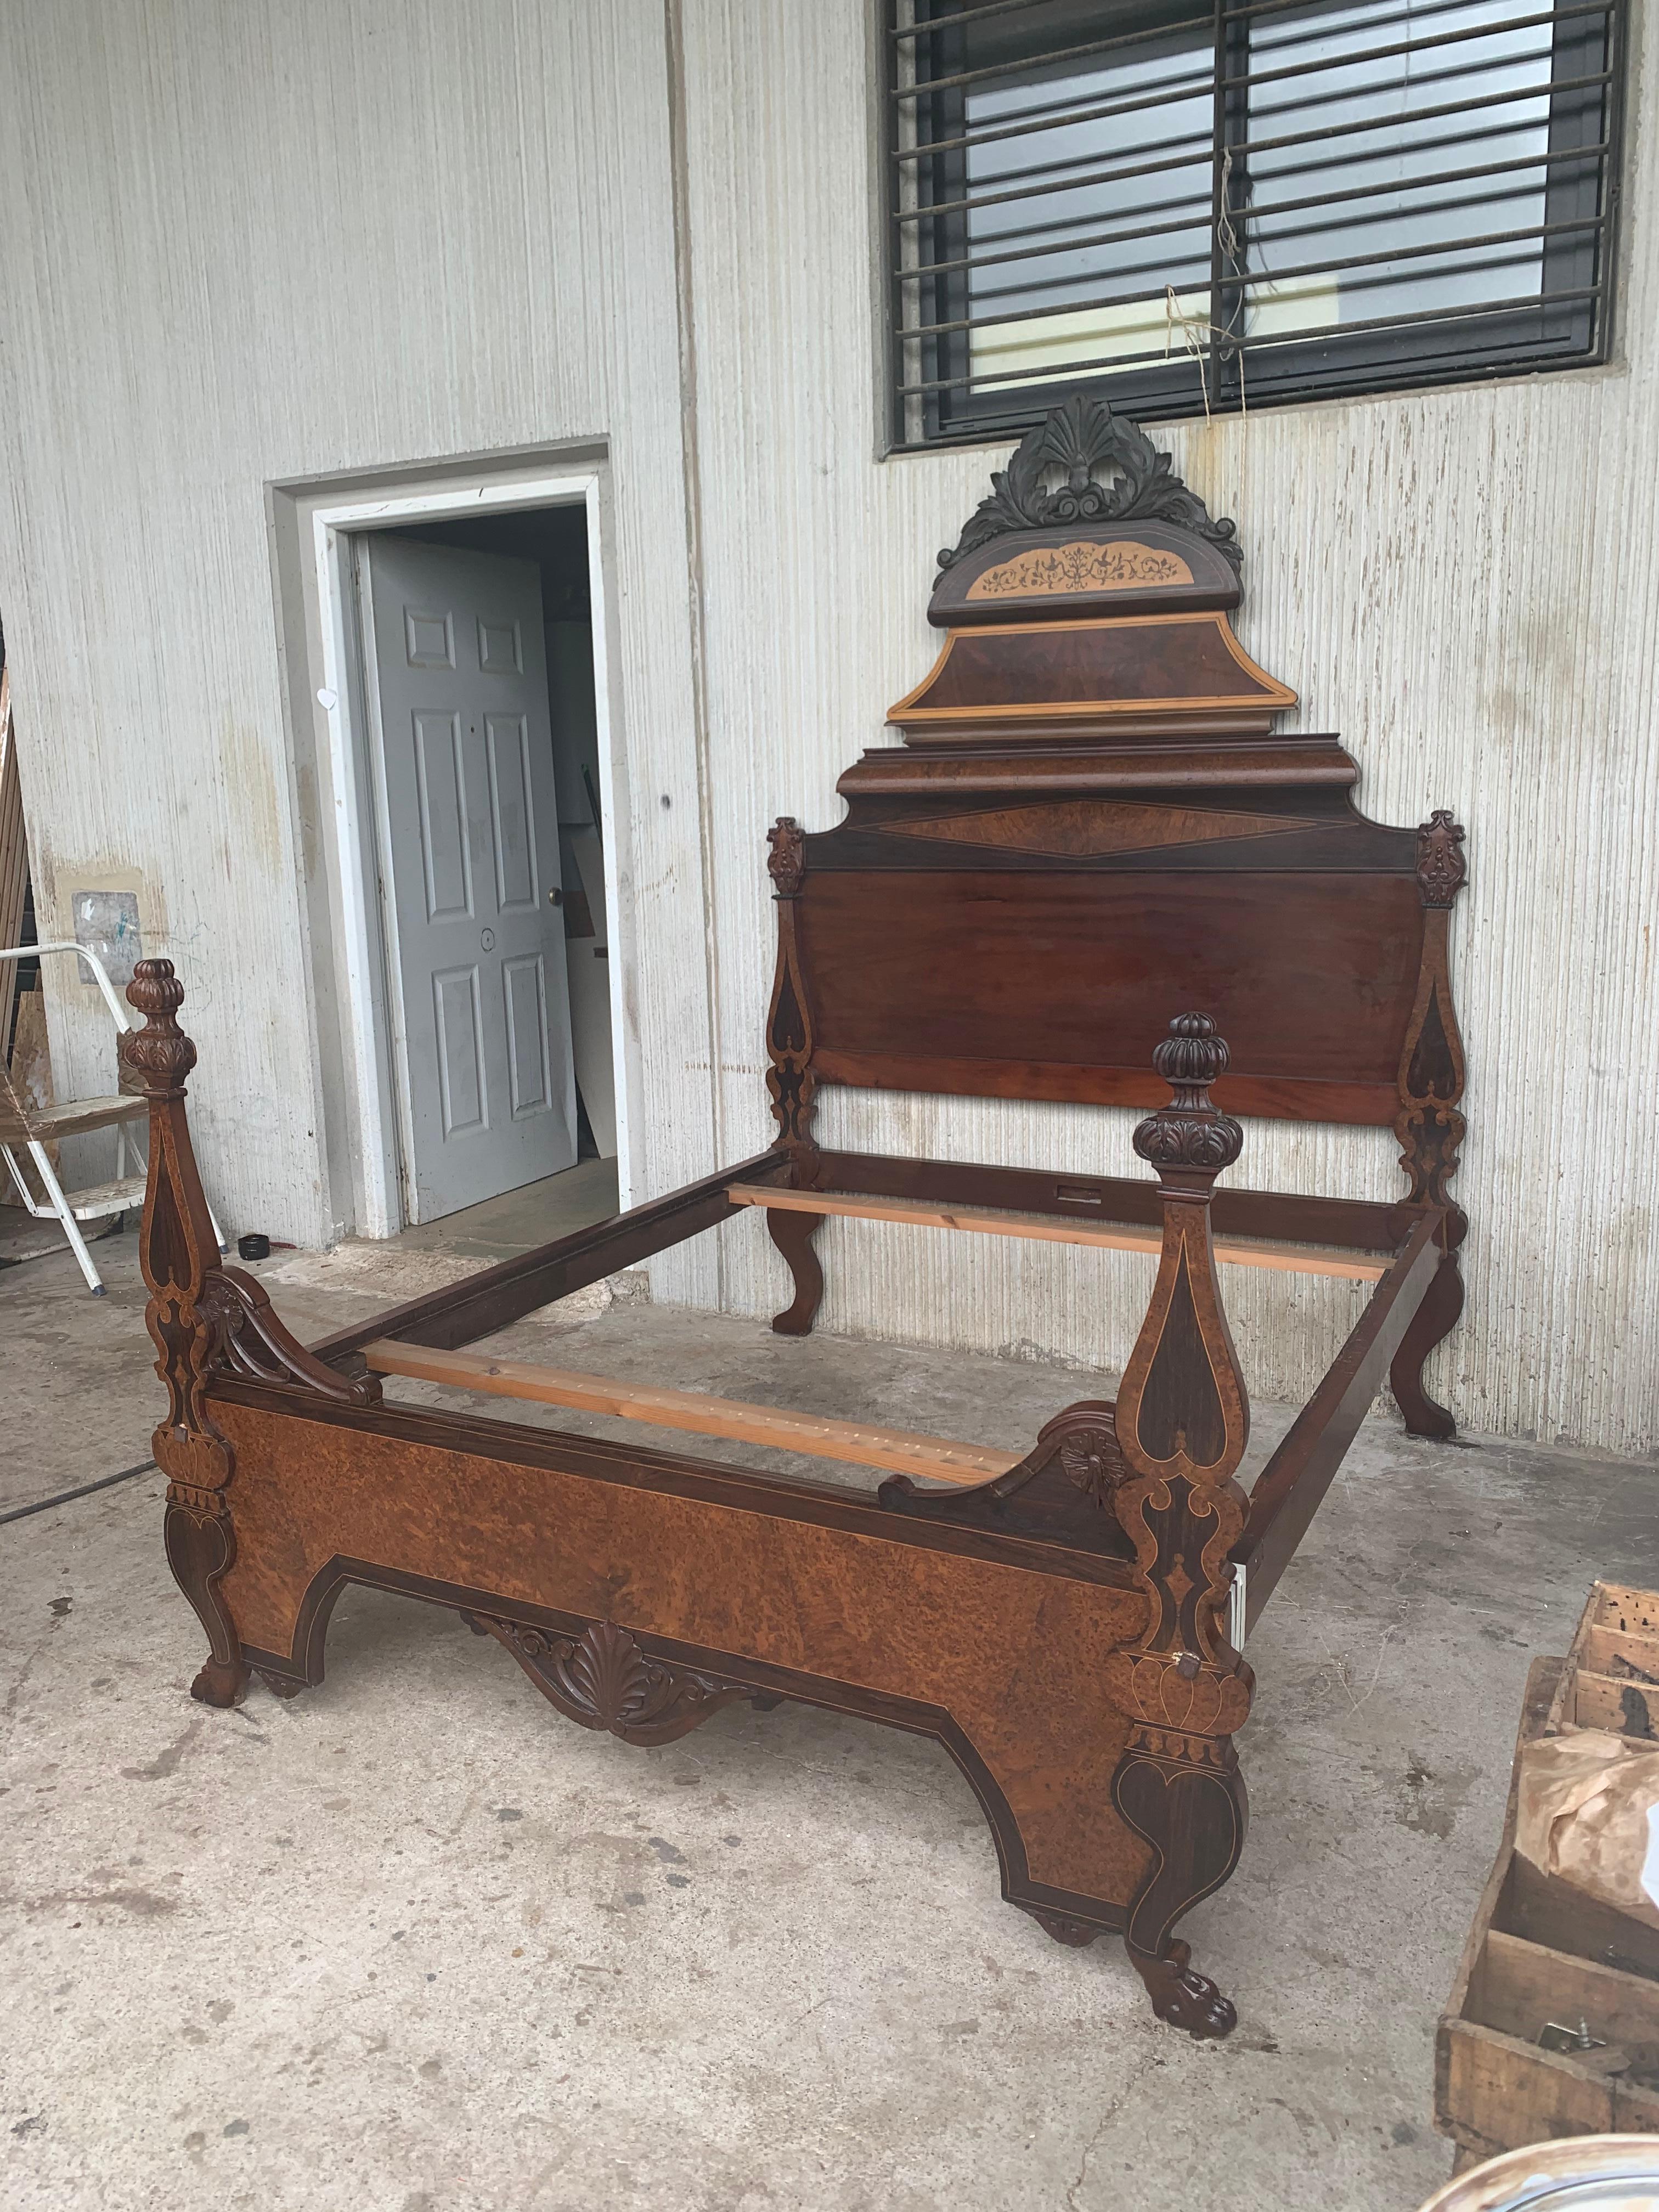 Mid-19th century Victorian Eastlake walnut carved Lincoln style bed. Features a high back with burled panels, carved finials, and open pediment with central shield / crest medallion (mirrored on front posts as well).